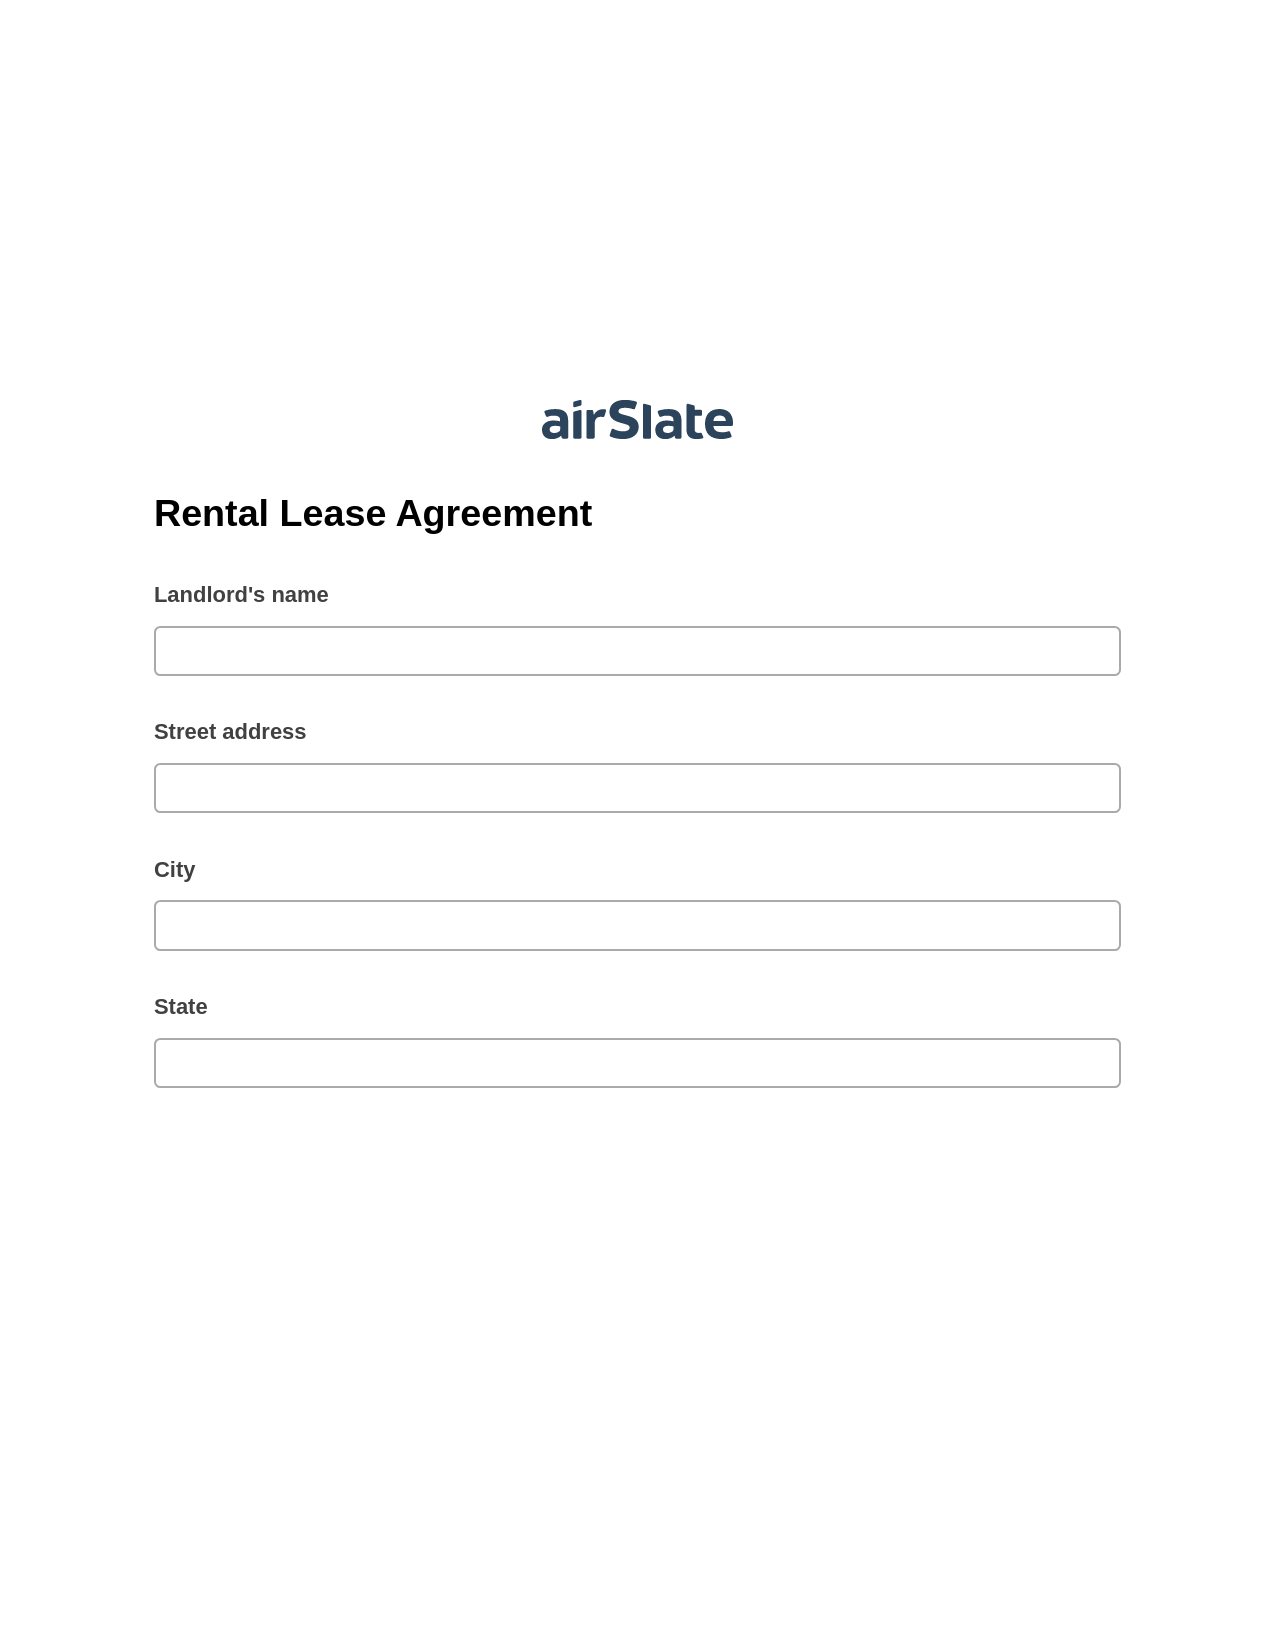 Multirole Rental Lease Agreement Pre-fill Slate from MS Dynamics 365 Records Bot, In-person Signing Bot, Box Bot